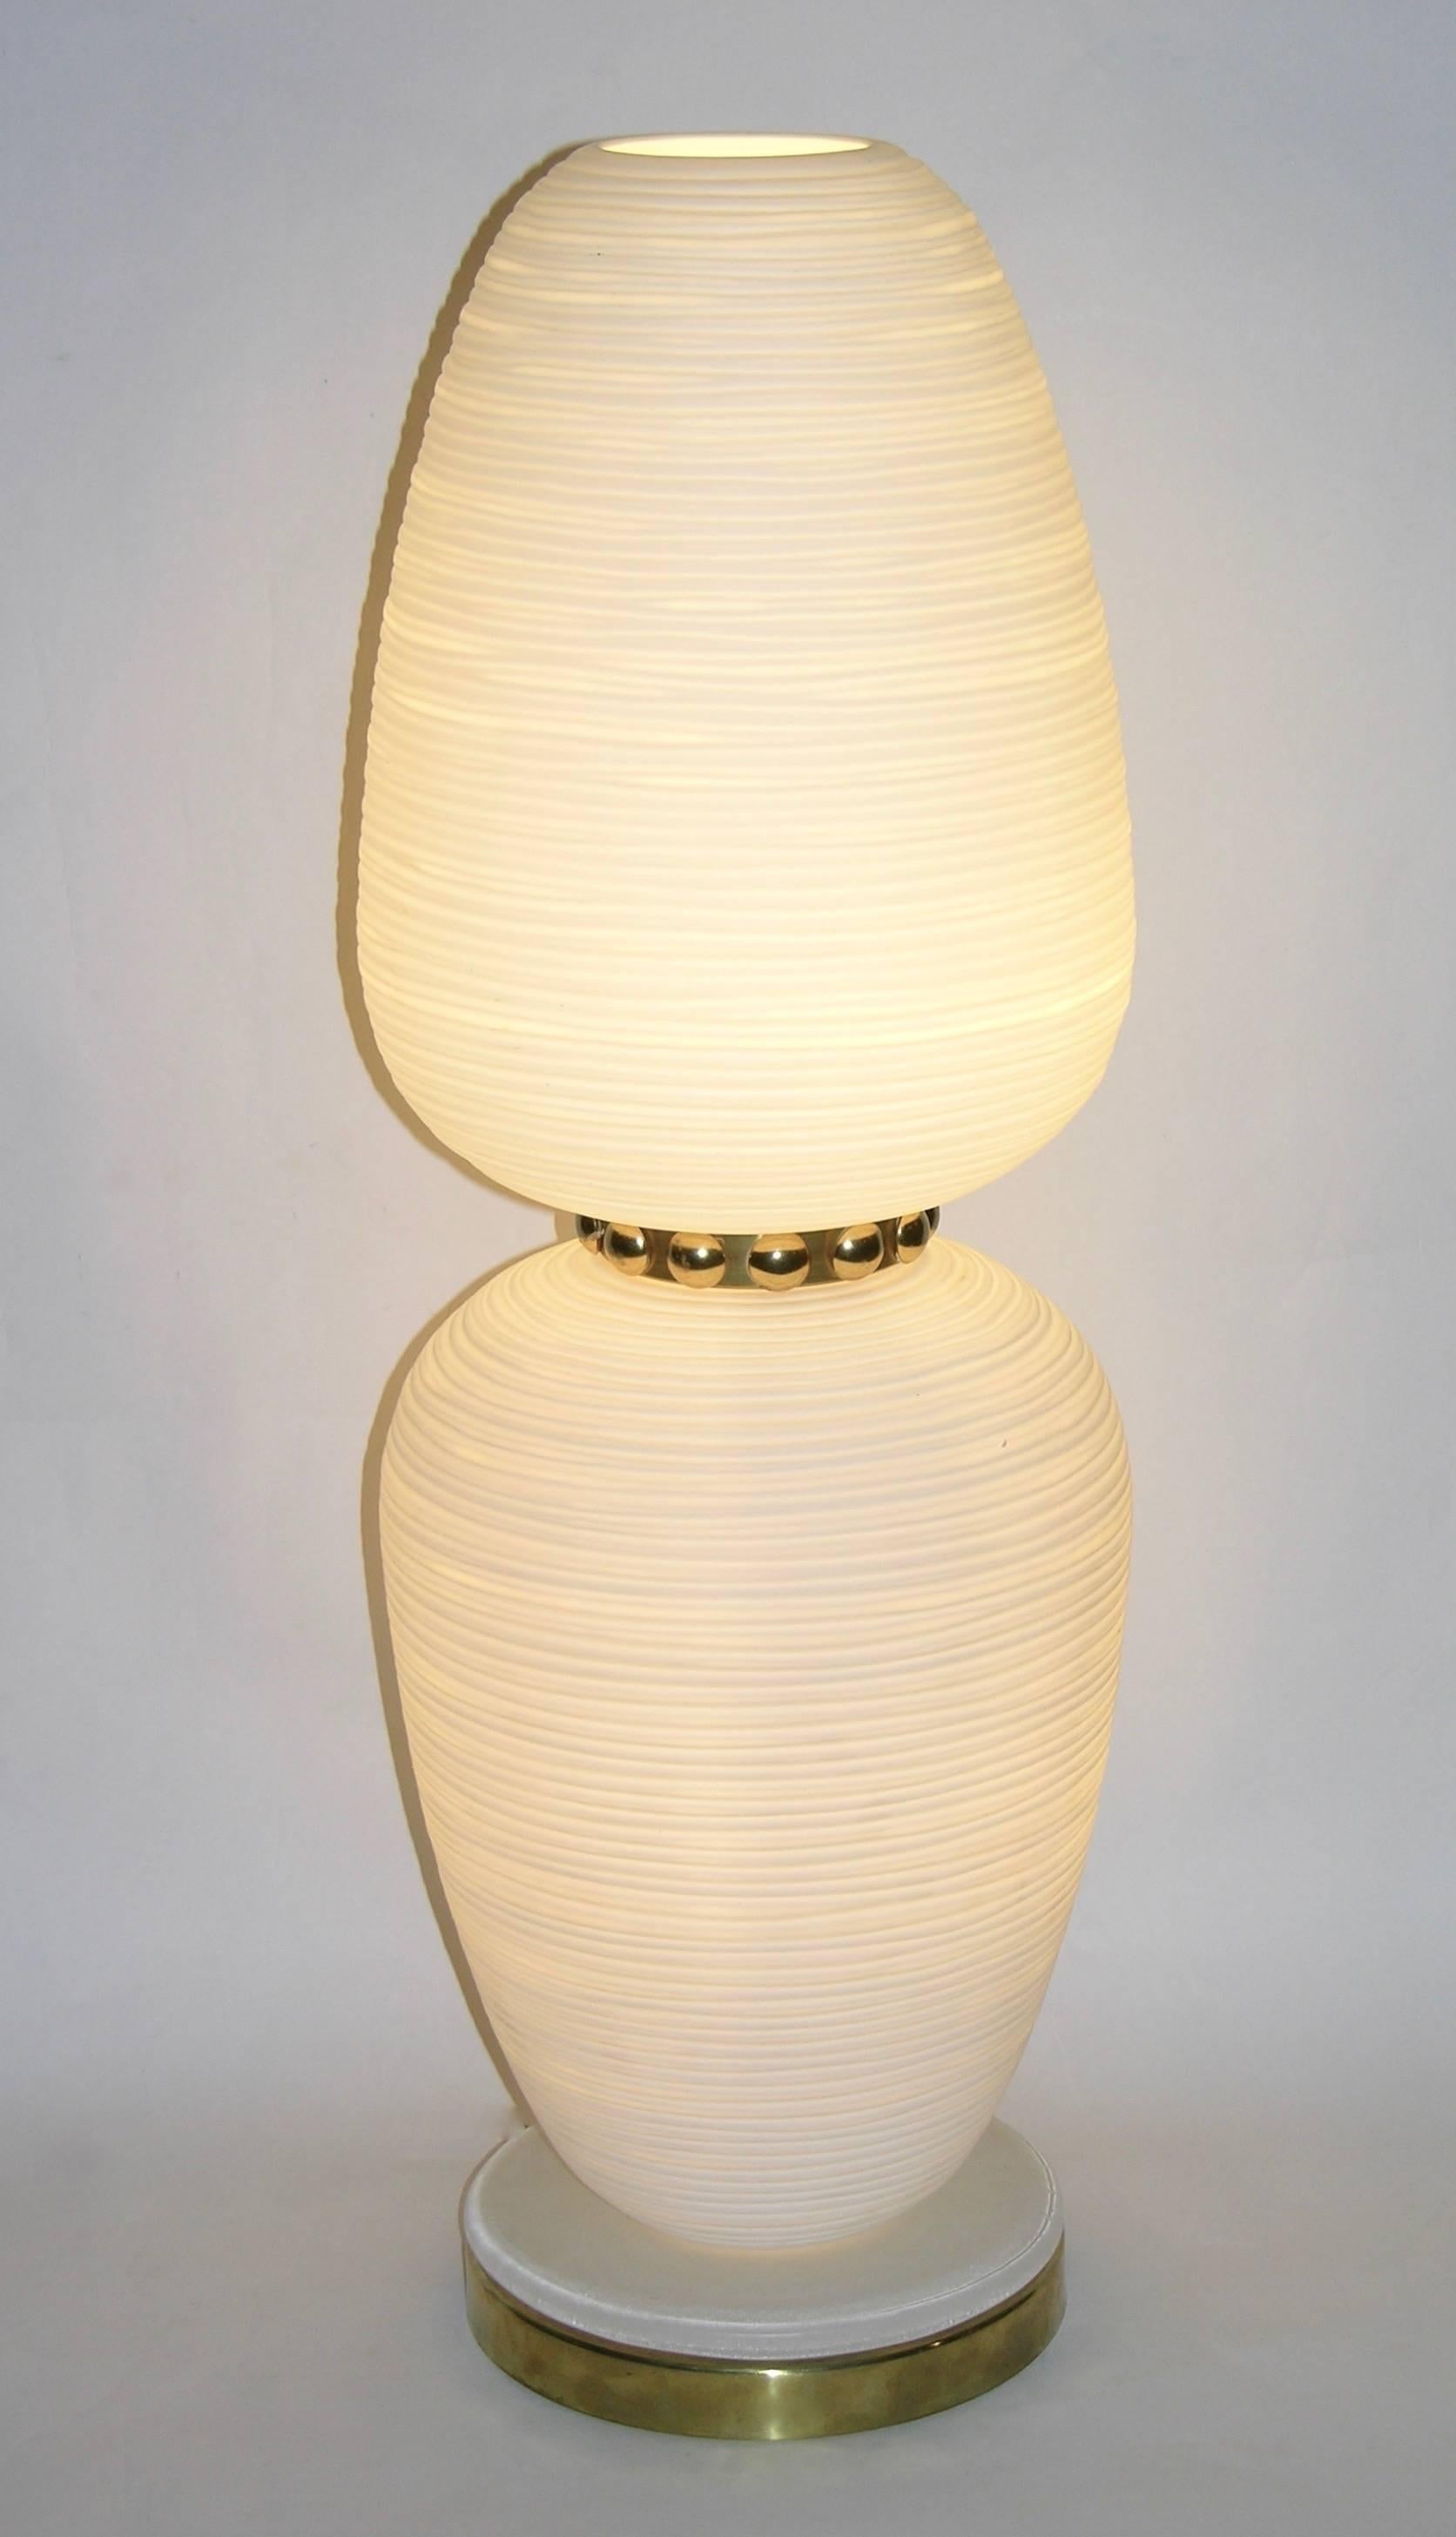 A rare pair of high quality Italian lamps by Vistosi in white blown Murano glass, worked with a very rare and difficult technique that gives a ceramic appearance and an incredible texture of fabric to the glass. The two ovoidal bodies, each with